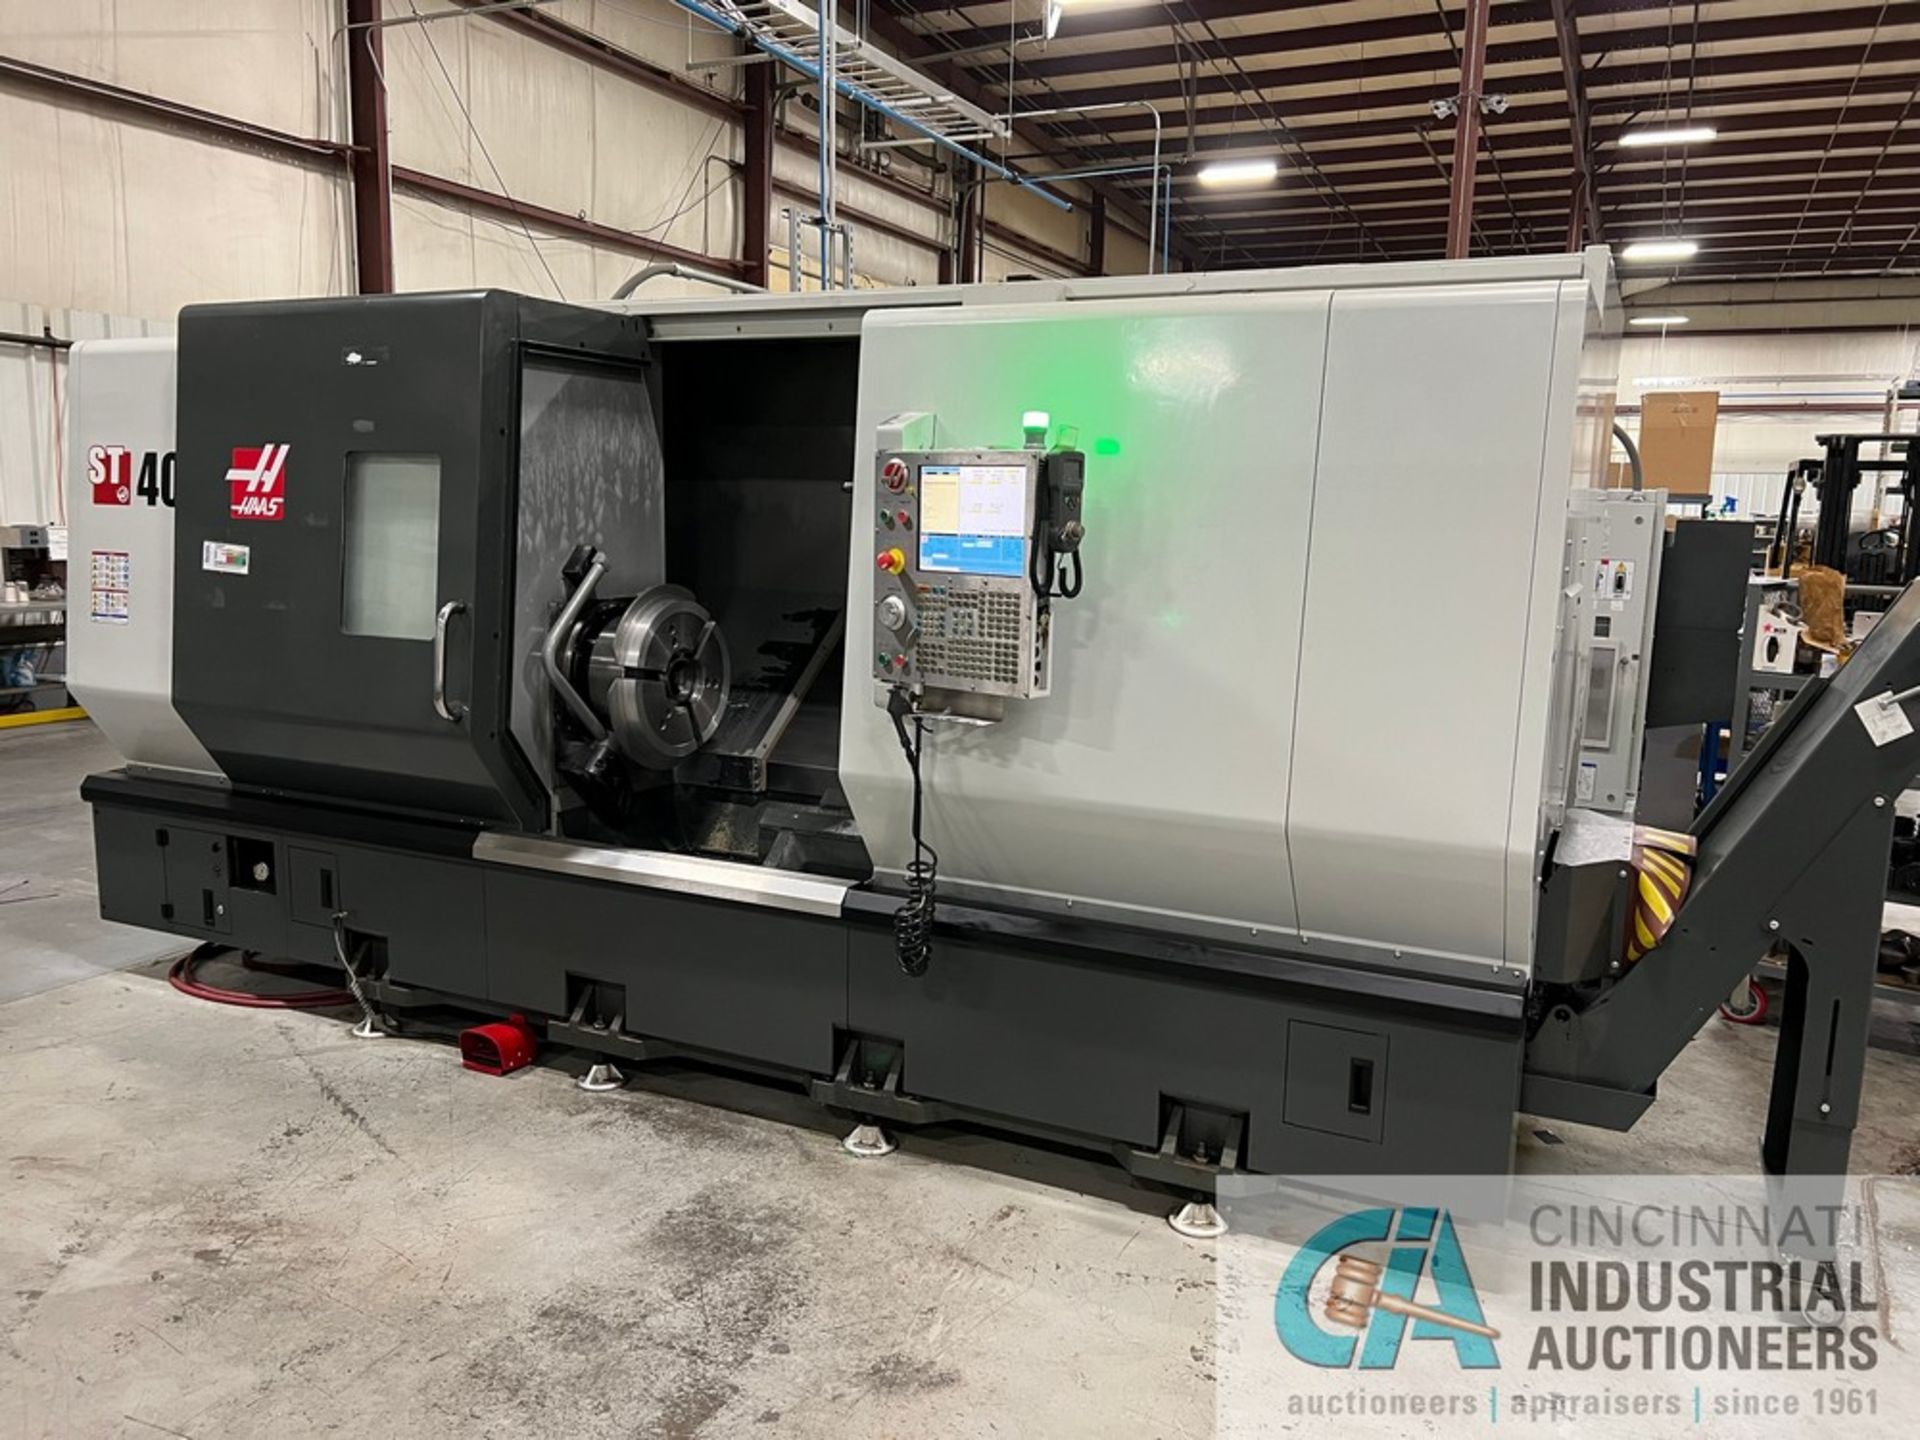 Haas Model ST-40 CNC Turning Center (2014) 1,788 Cutting Hours Showing - Image 5 of 12